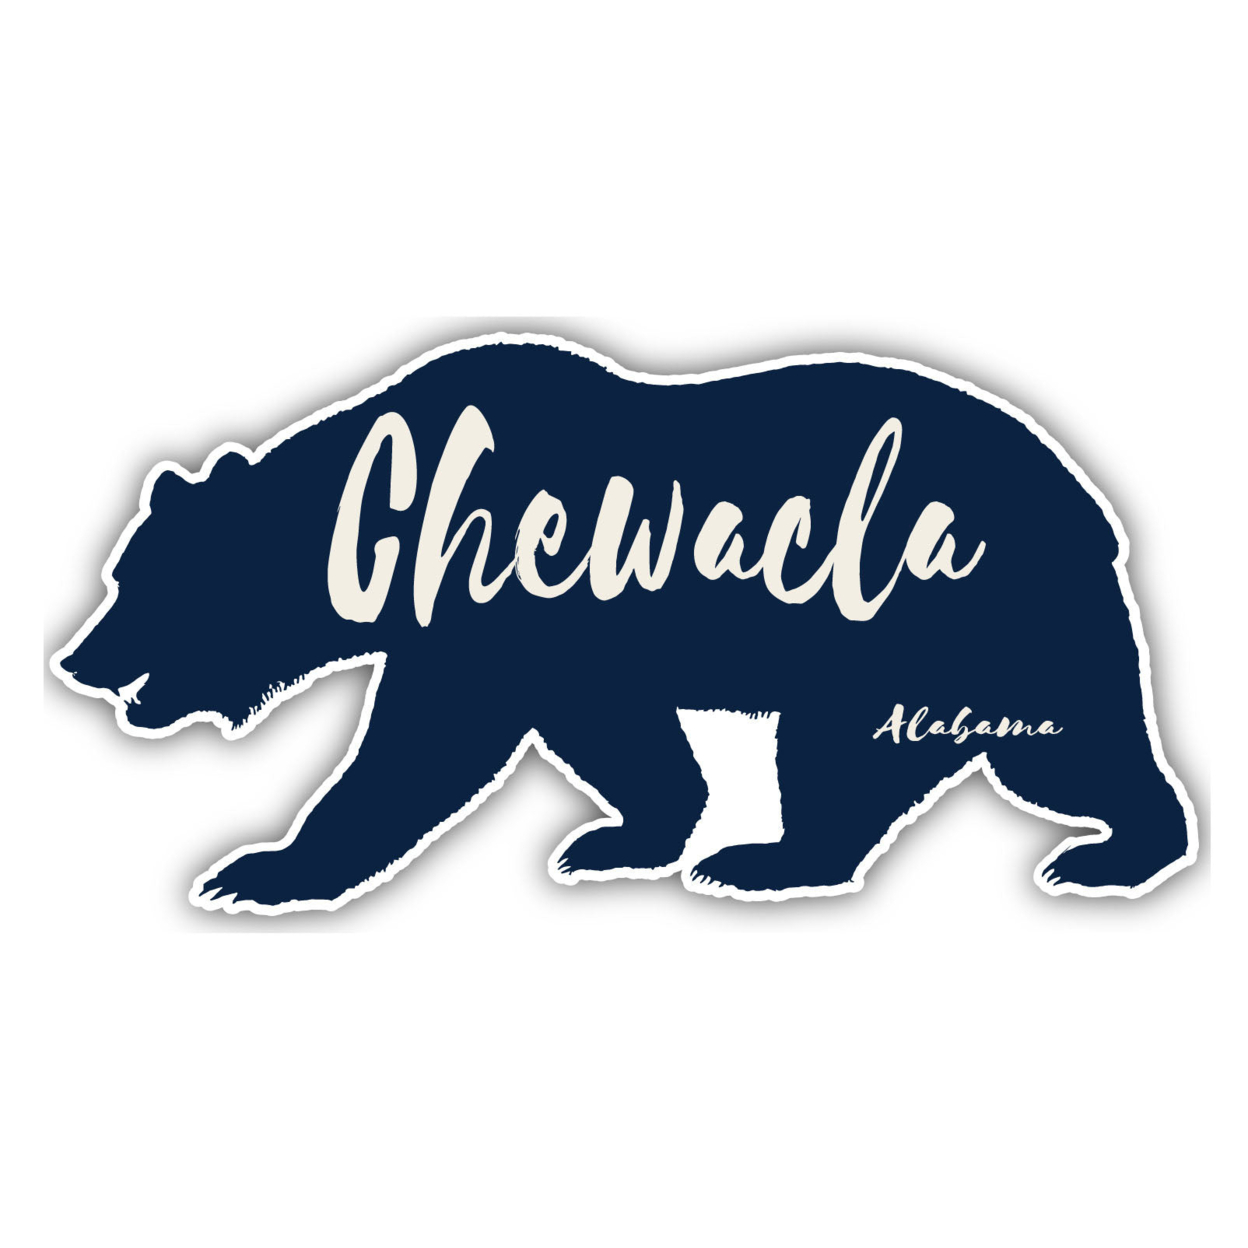 Chewacla Alabama Souvenir Decorative Stickers (Choose Theme And Size) - 4-Pack, 6-Inch, Bear